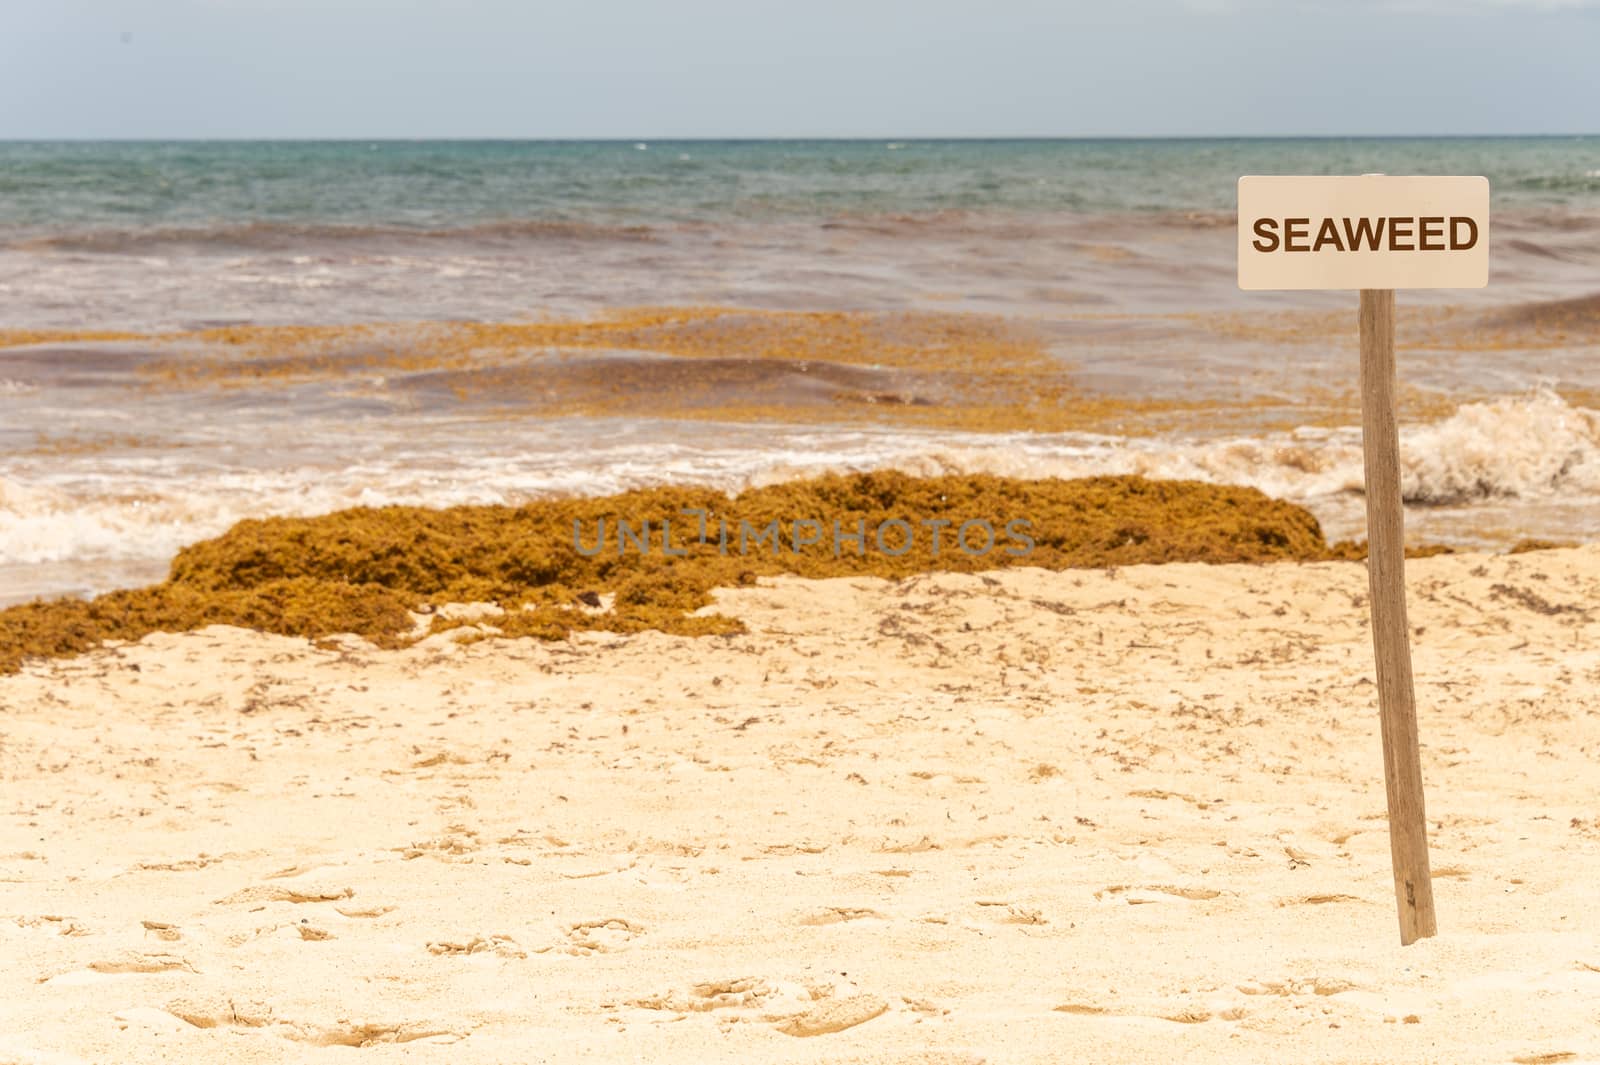 Seaweed sign and patches of Sargassum seaweed on a Tulum beach in Mexico (montage)